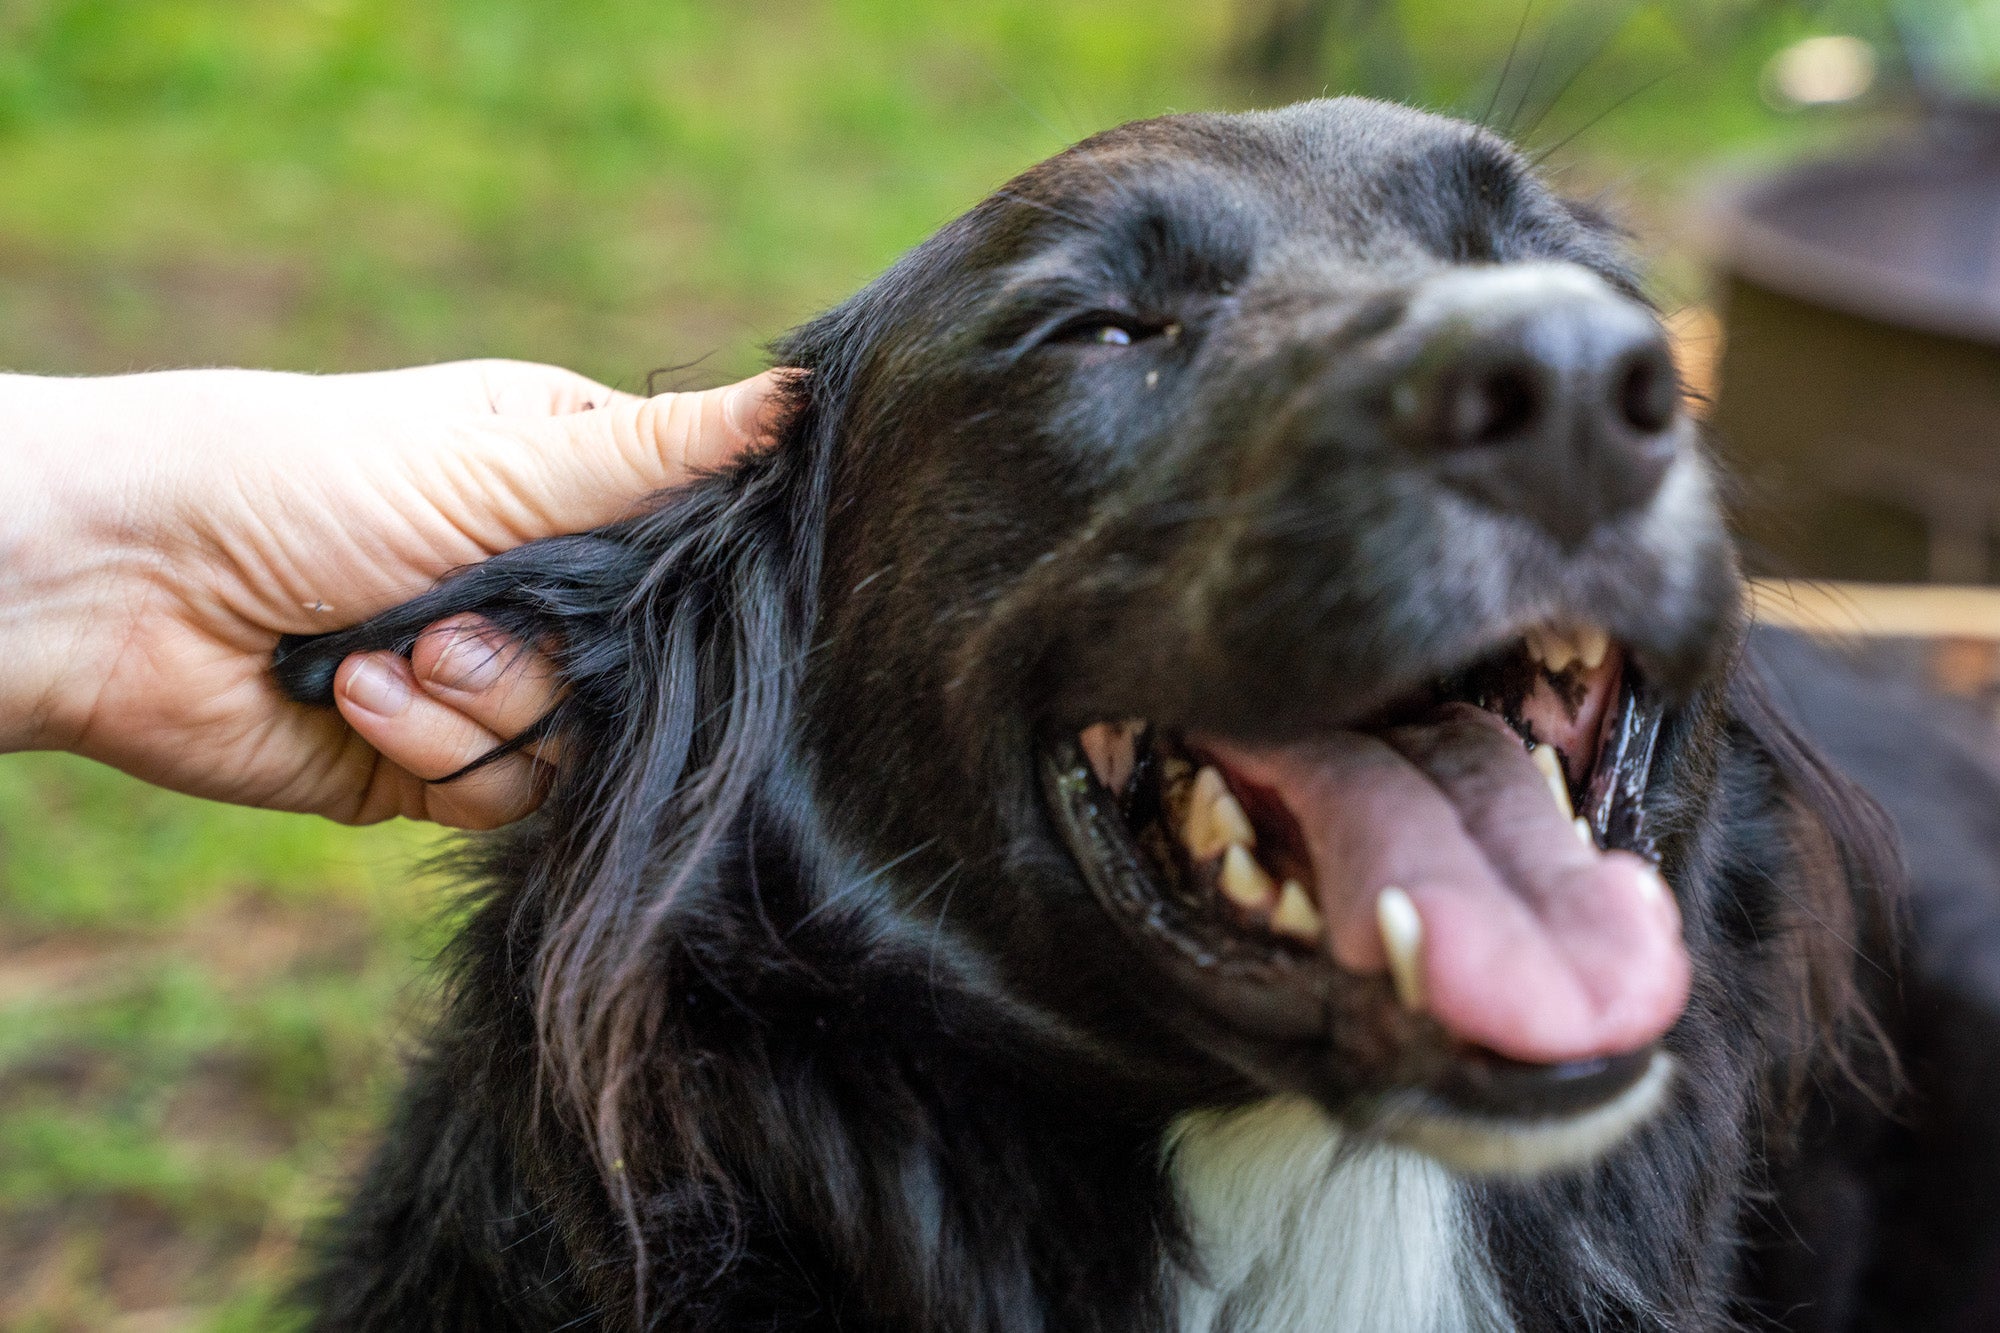 Black dog gets ear scratched by person.